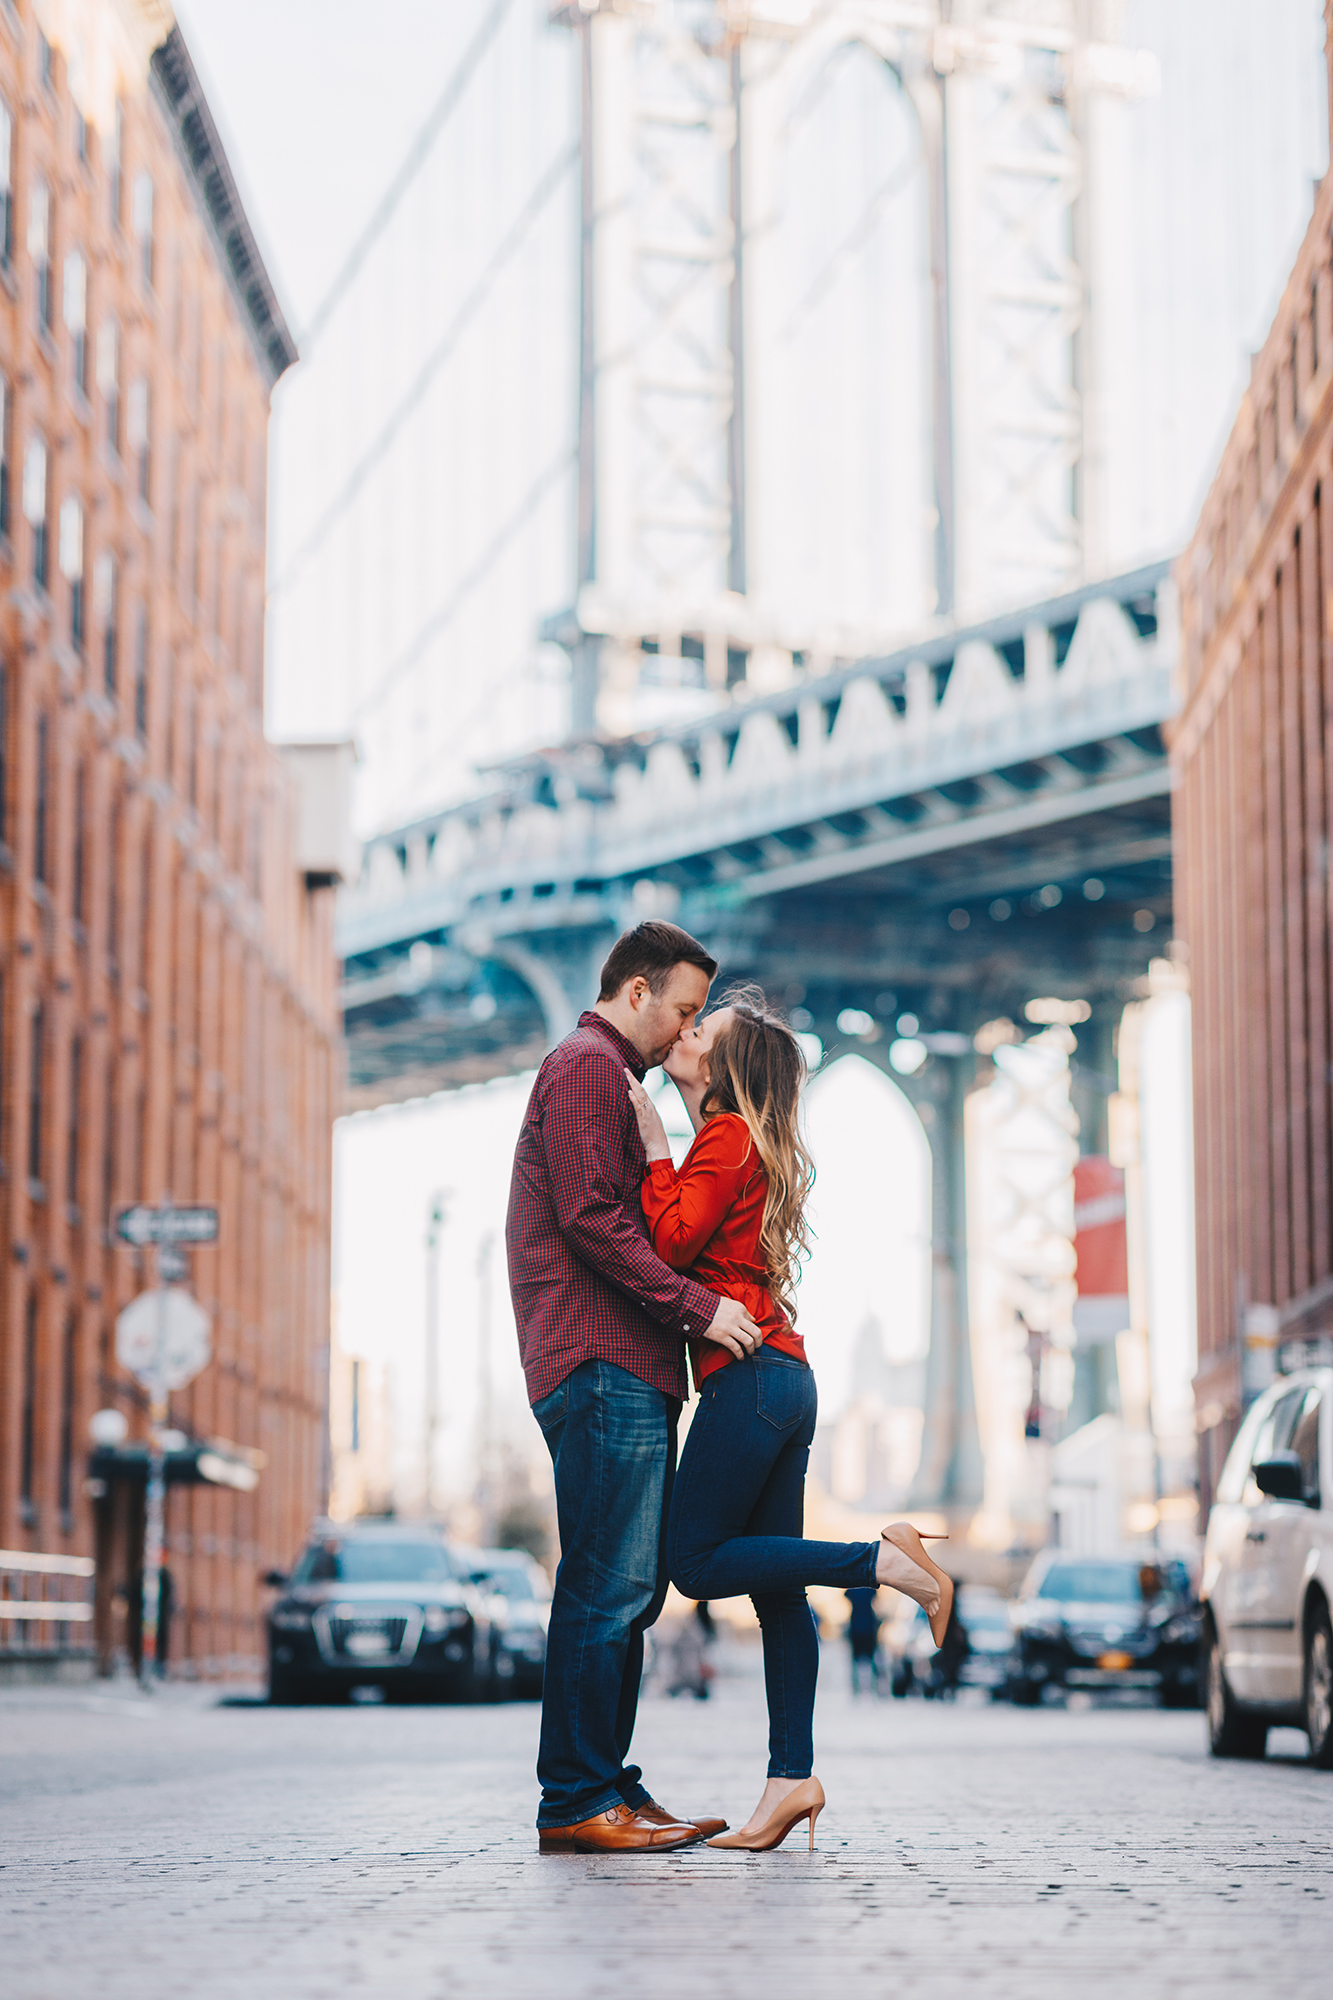 Wonderful Engagement Photo Sessions in NYC